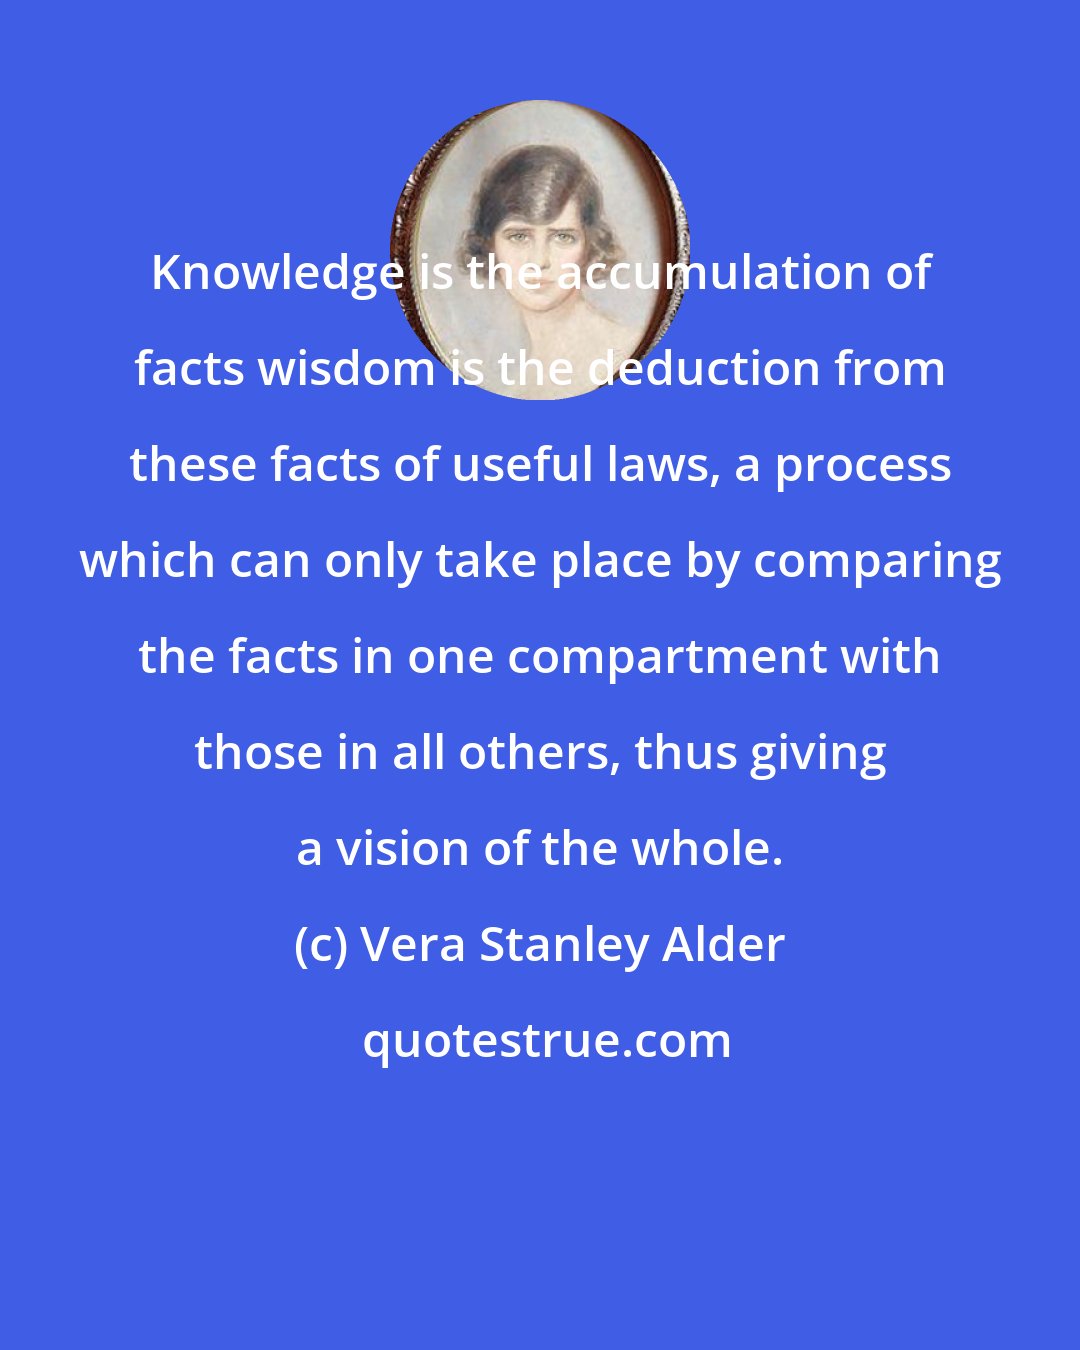 Vera Stanley Alder: Knowledge is the accumulation of facts wisdom is the deduction from these facts of useful laws, a process which can only take place by comparing the facts in one compartment with those in all others, thus giving a vision of the whole.